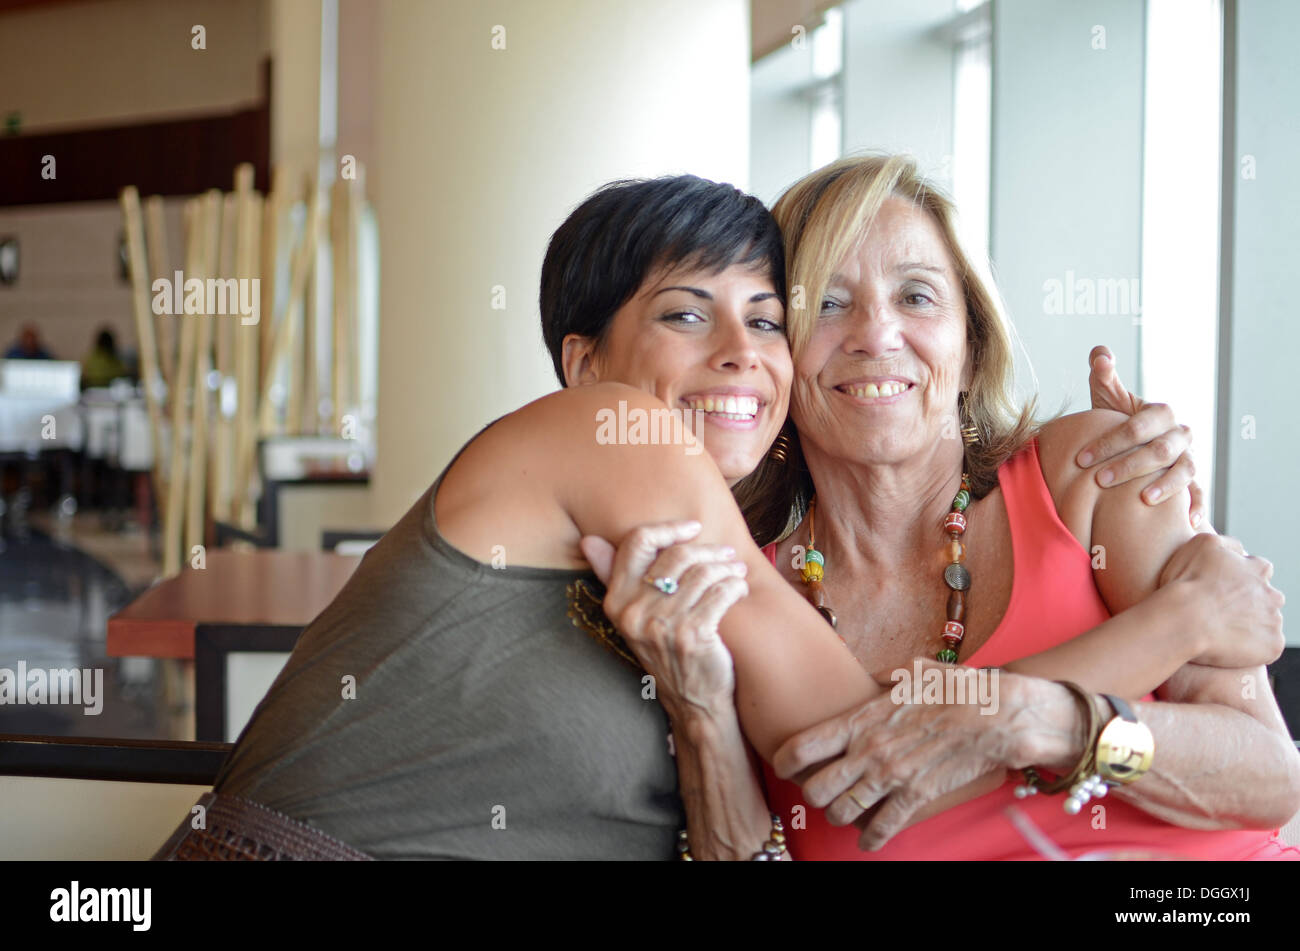 Mature and young woman hug affectionately Stock Photo - Alamy